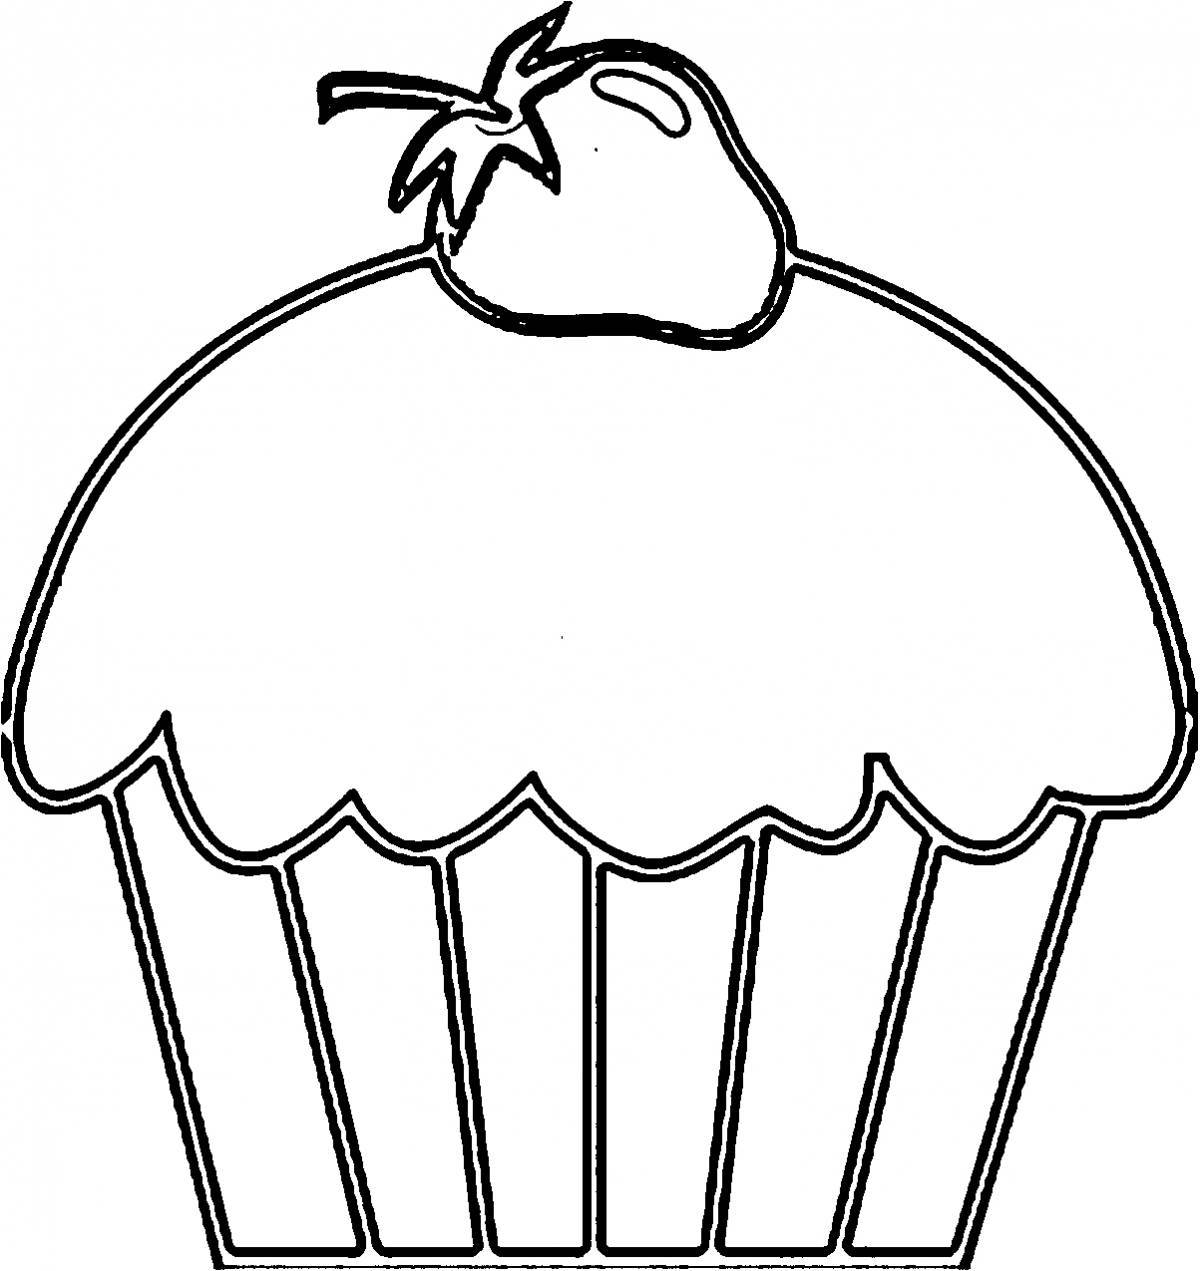 Adorable cupcake coloring page